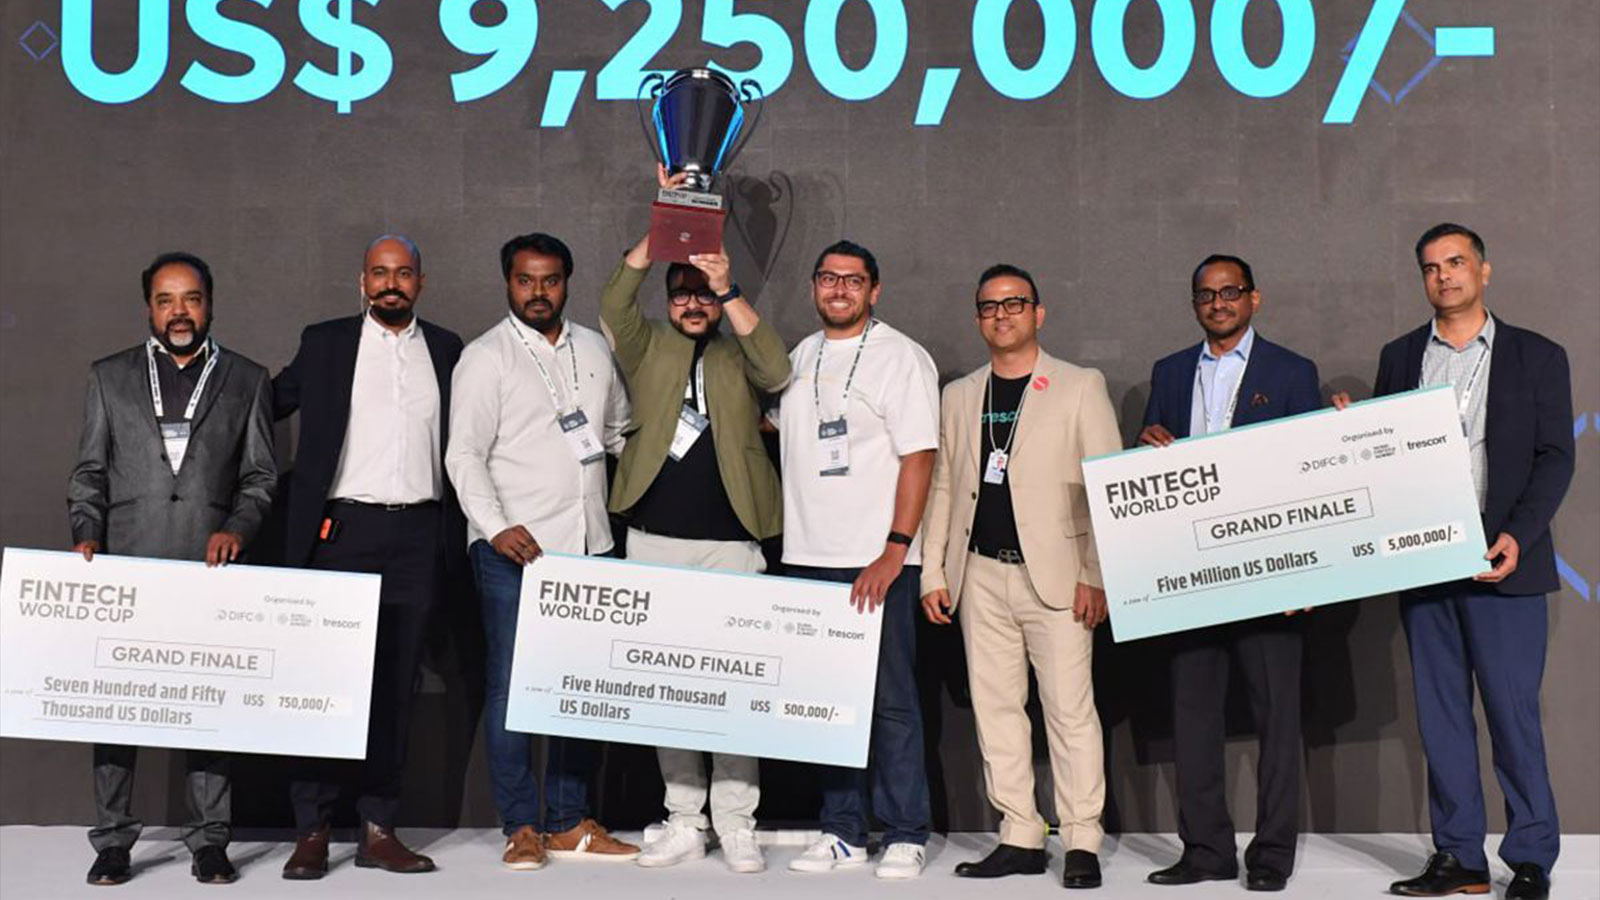 USD 9.25 Million in Investments Committed to Start-ups during FinTech World Cup at Dubai FinTech Summit